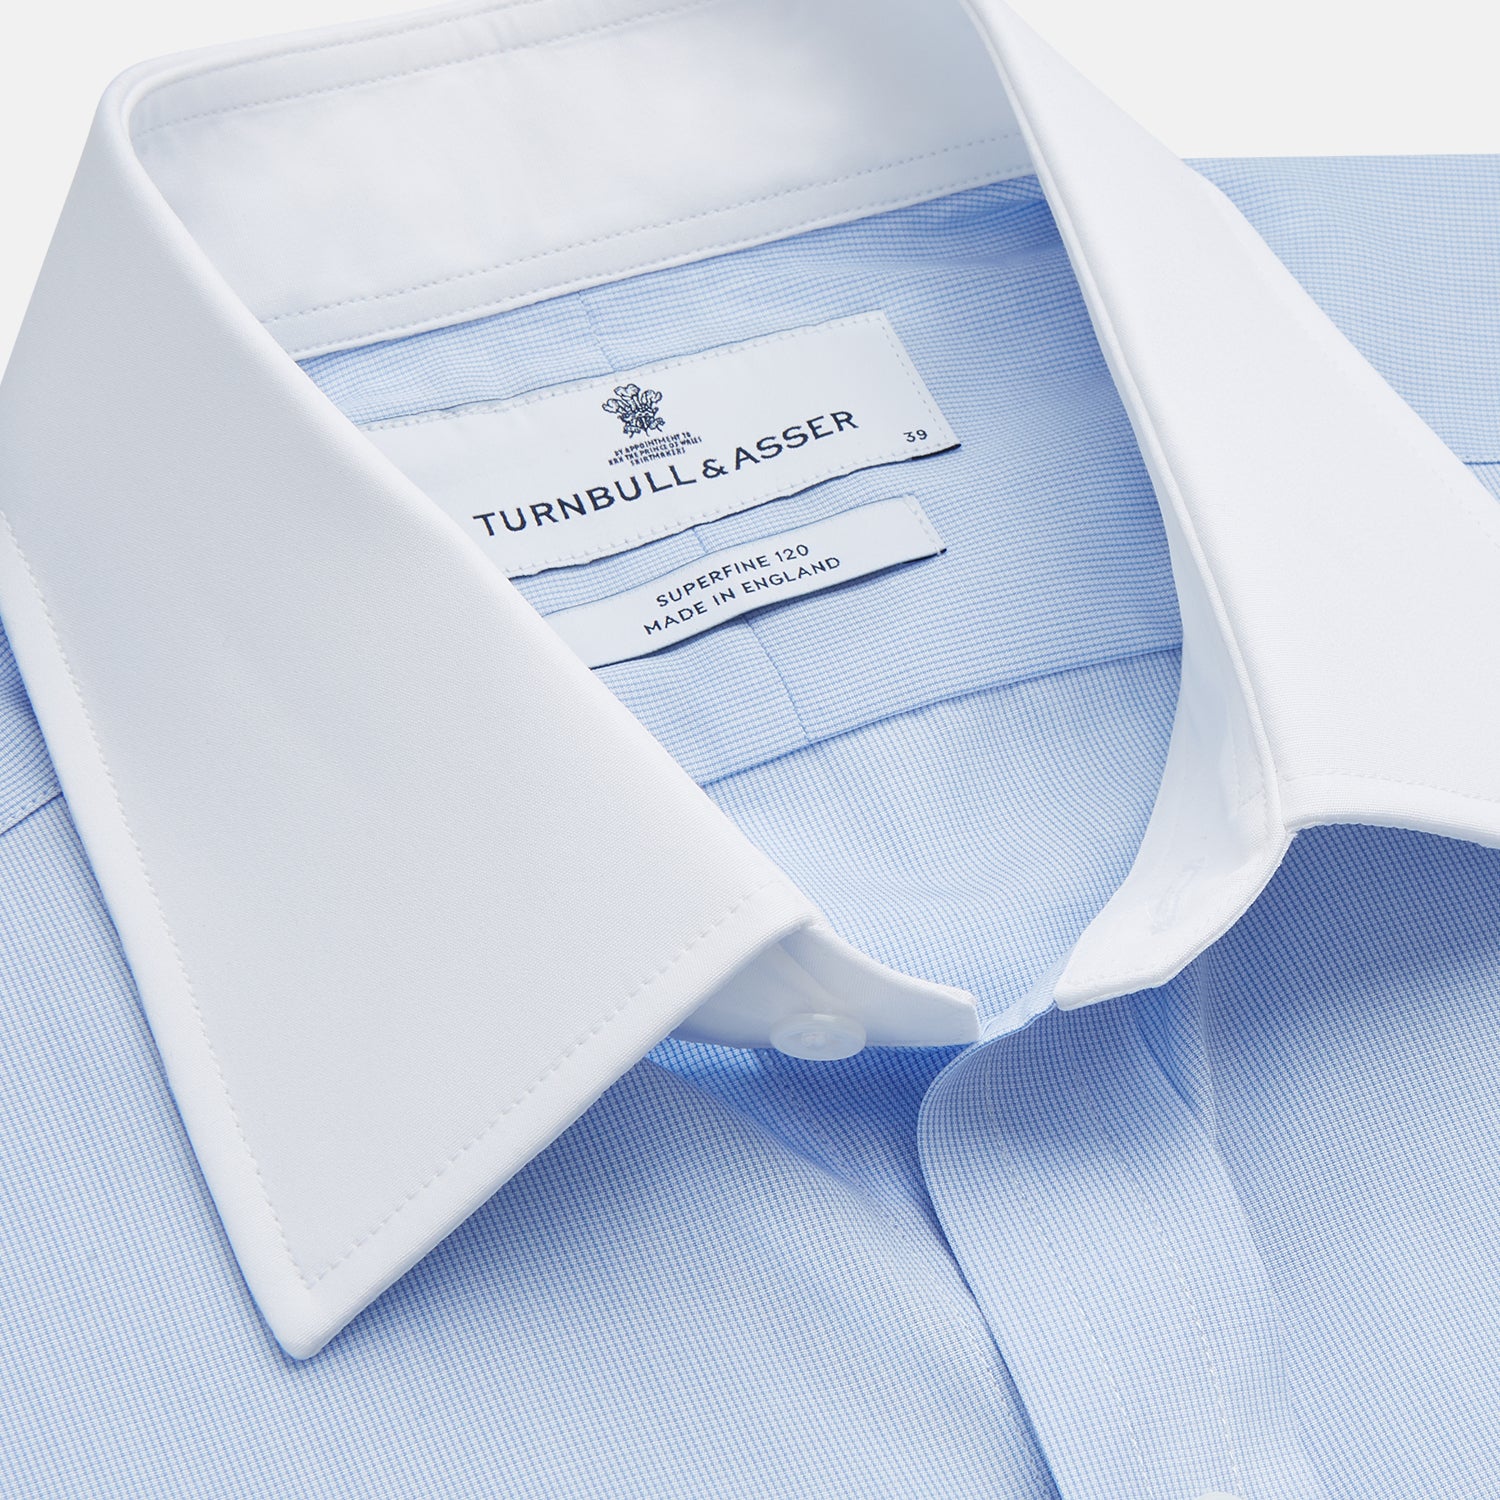 Mid Blue Micro-Check Regular Fit Shirt with White T&A Collar and Double Cuffs